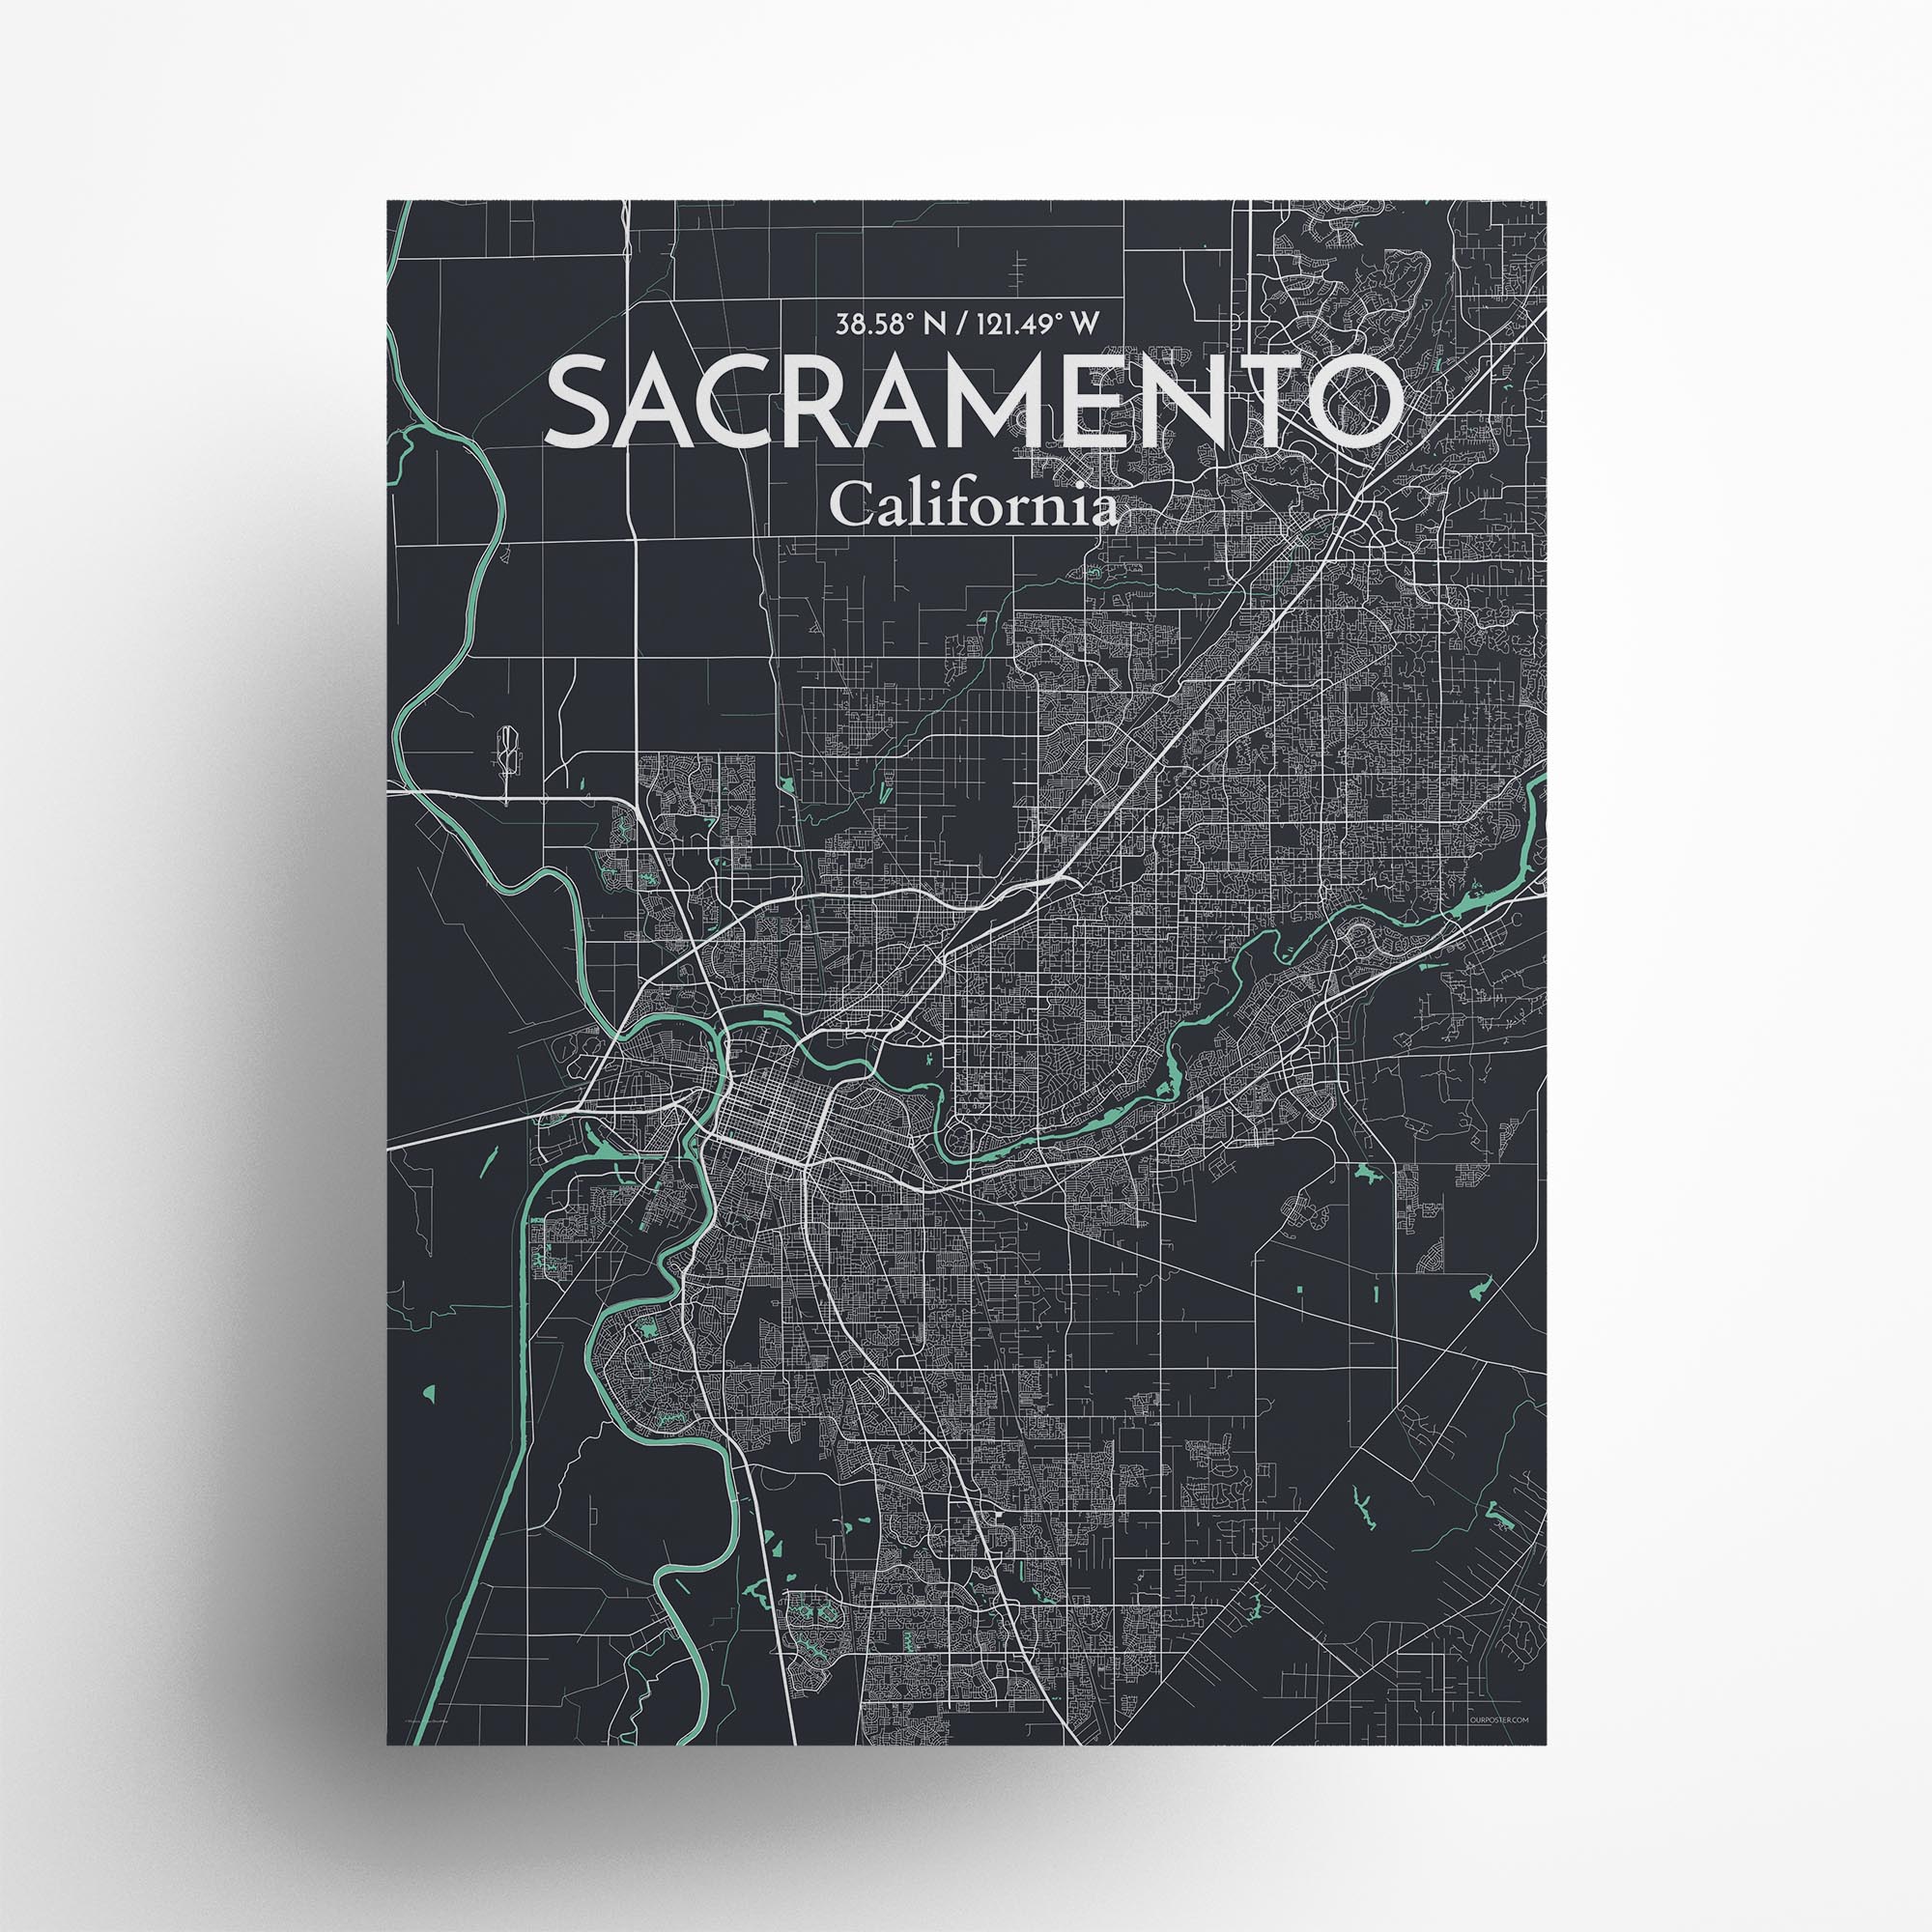 Sacramento city map poster in Dream of size 18" x 24"